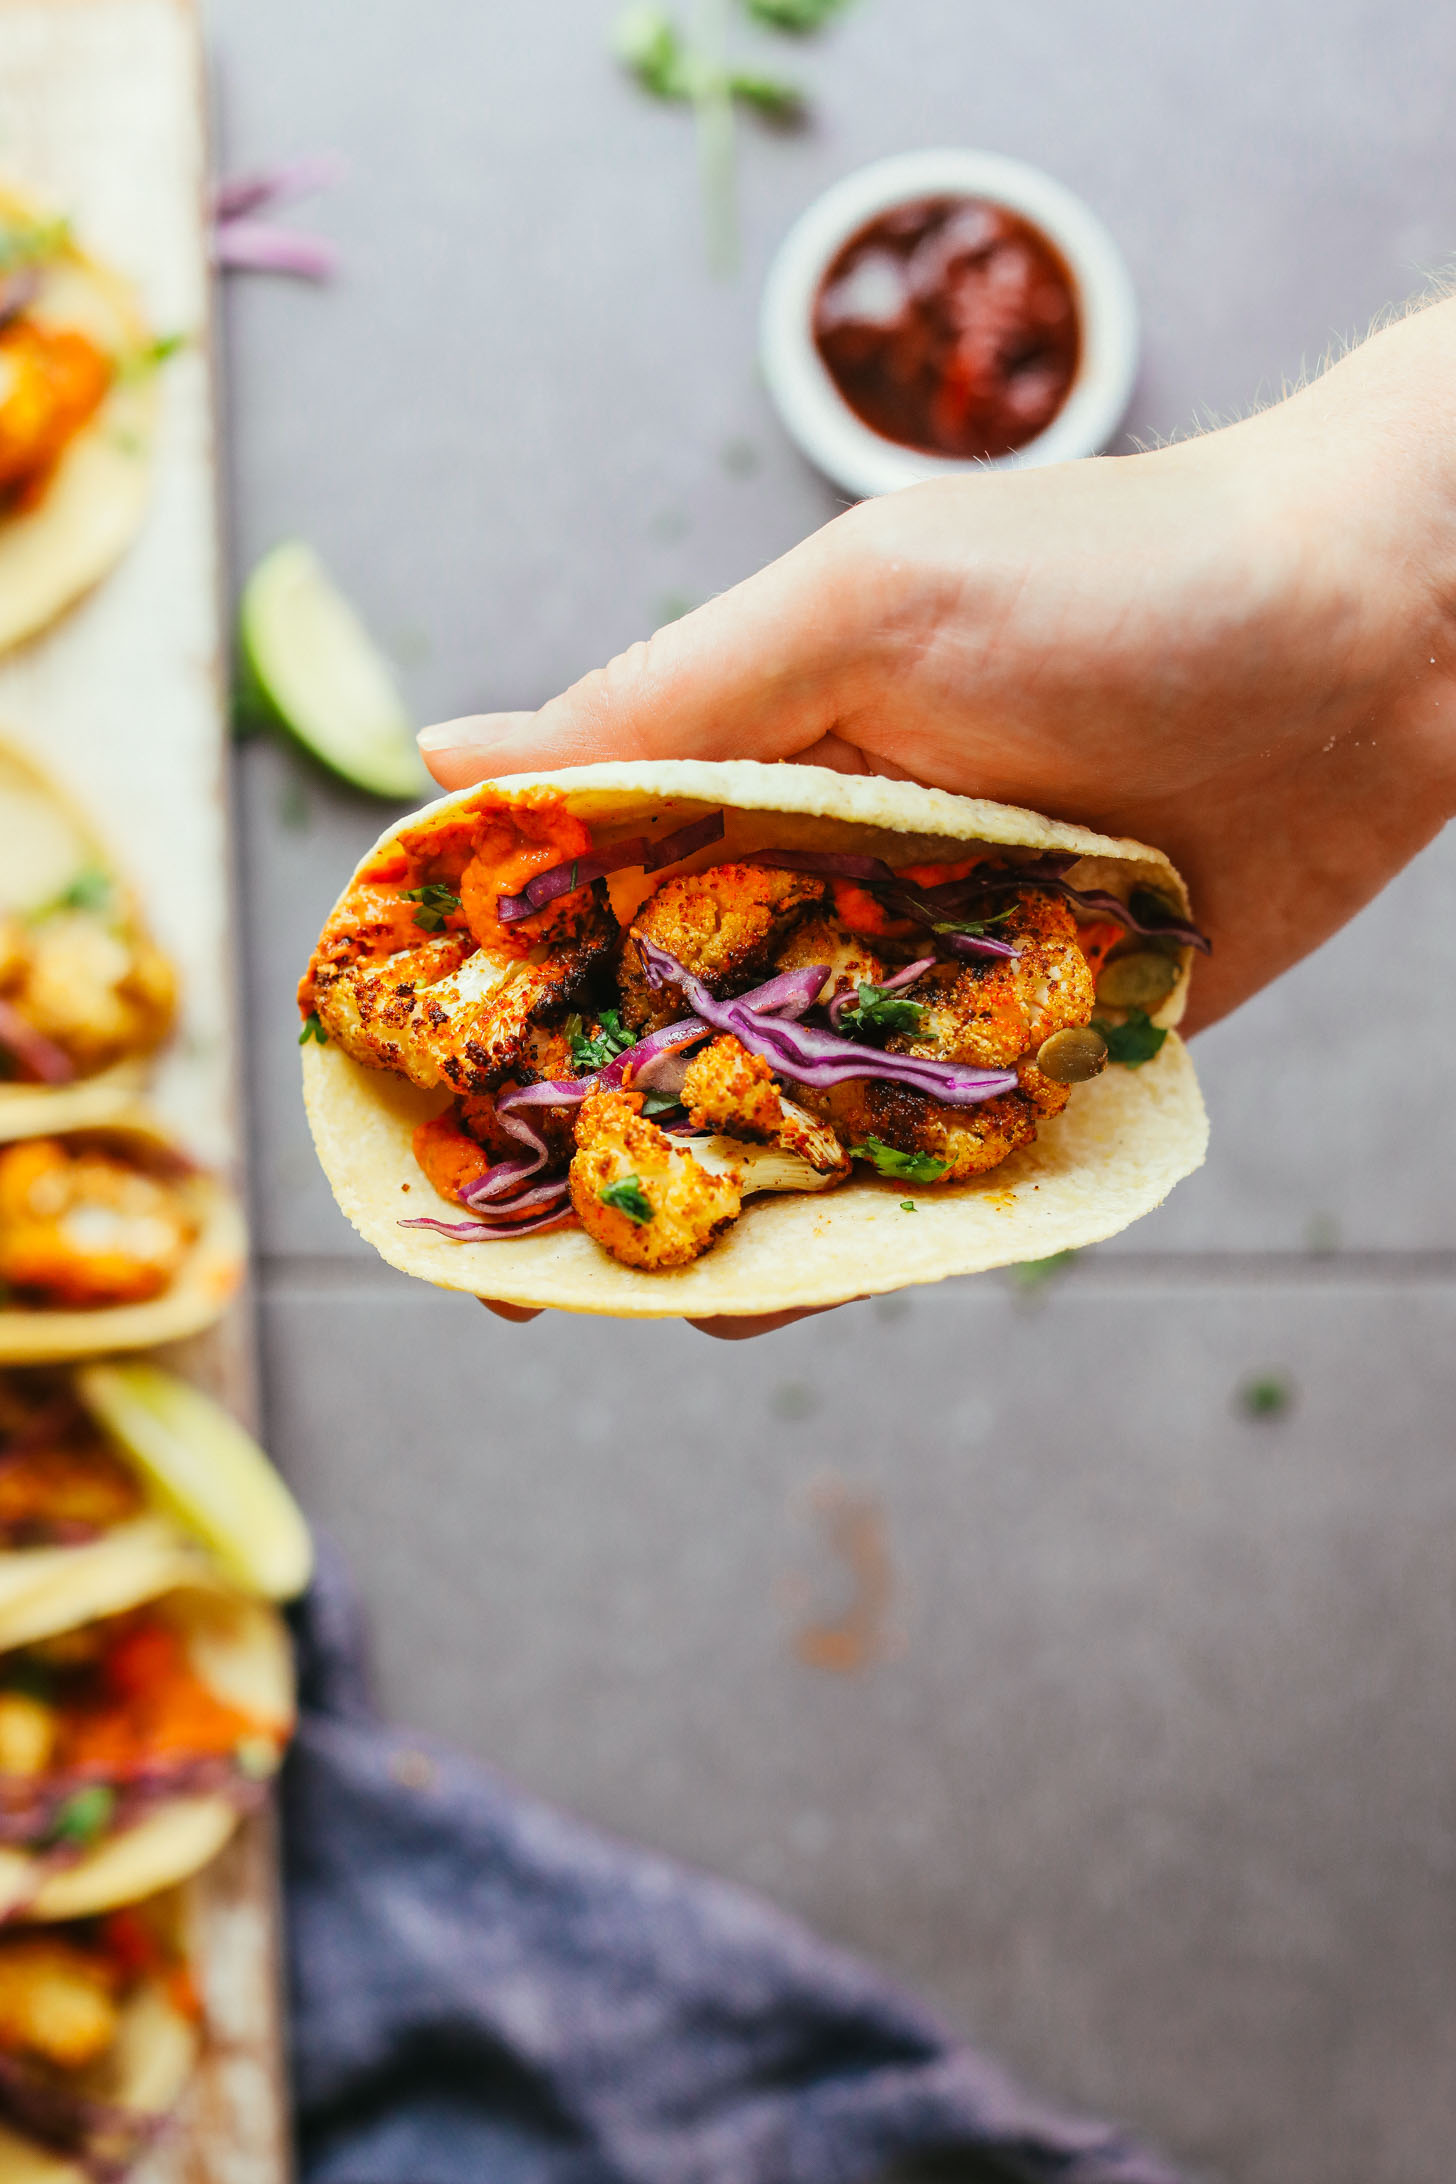  vegan taco made with roasted cauliflower & cipotle sauce, #14 on our best Vegan Taco list